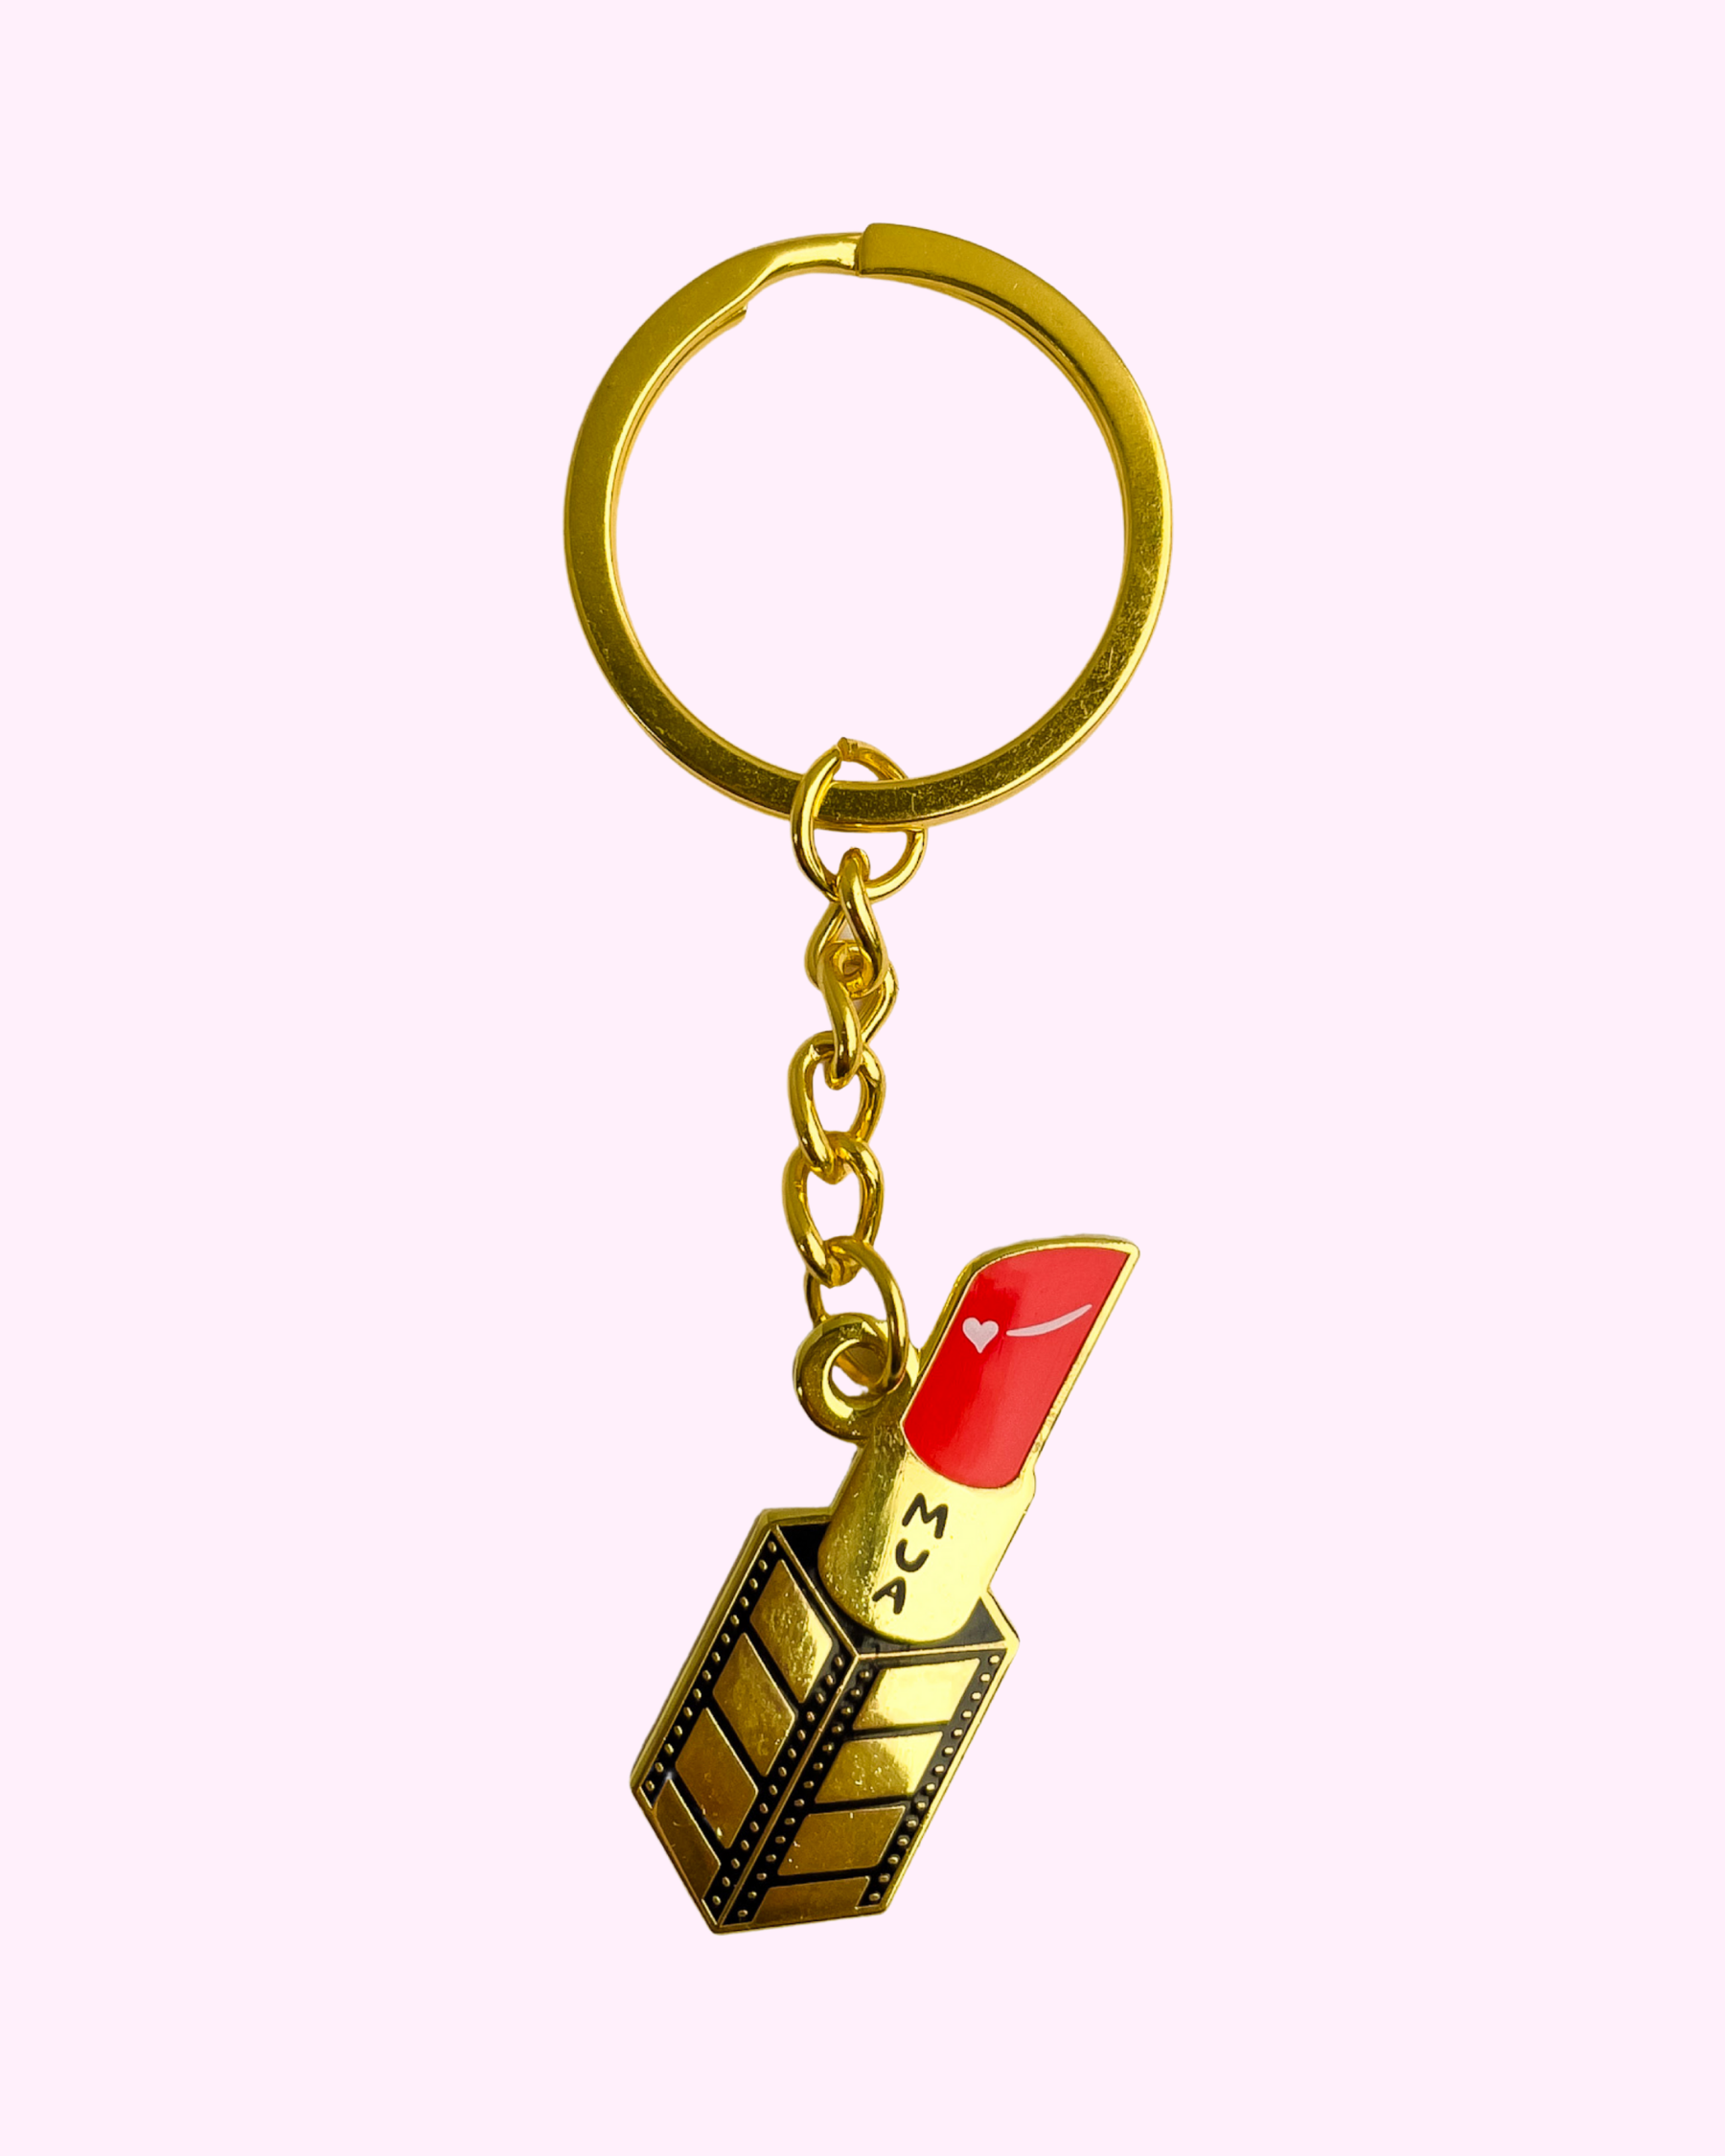 Lipstick bag keychain – Blade To Beauty Store